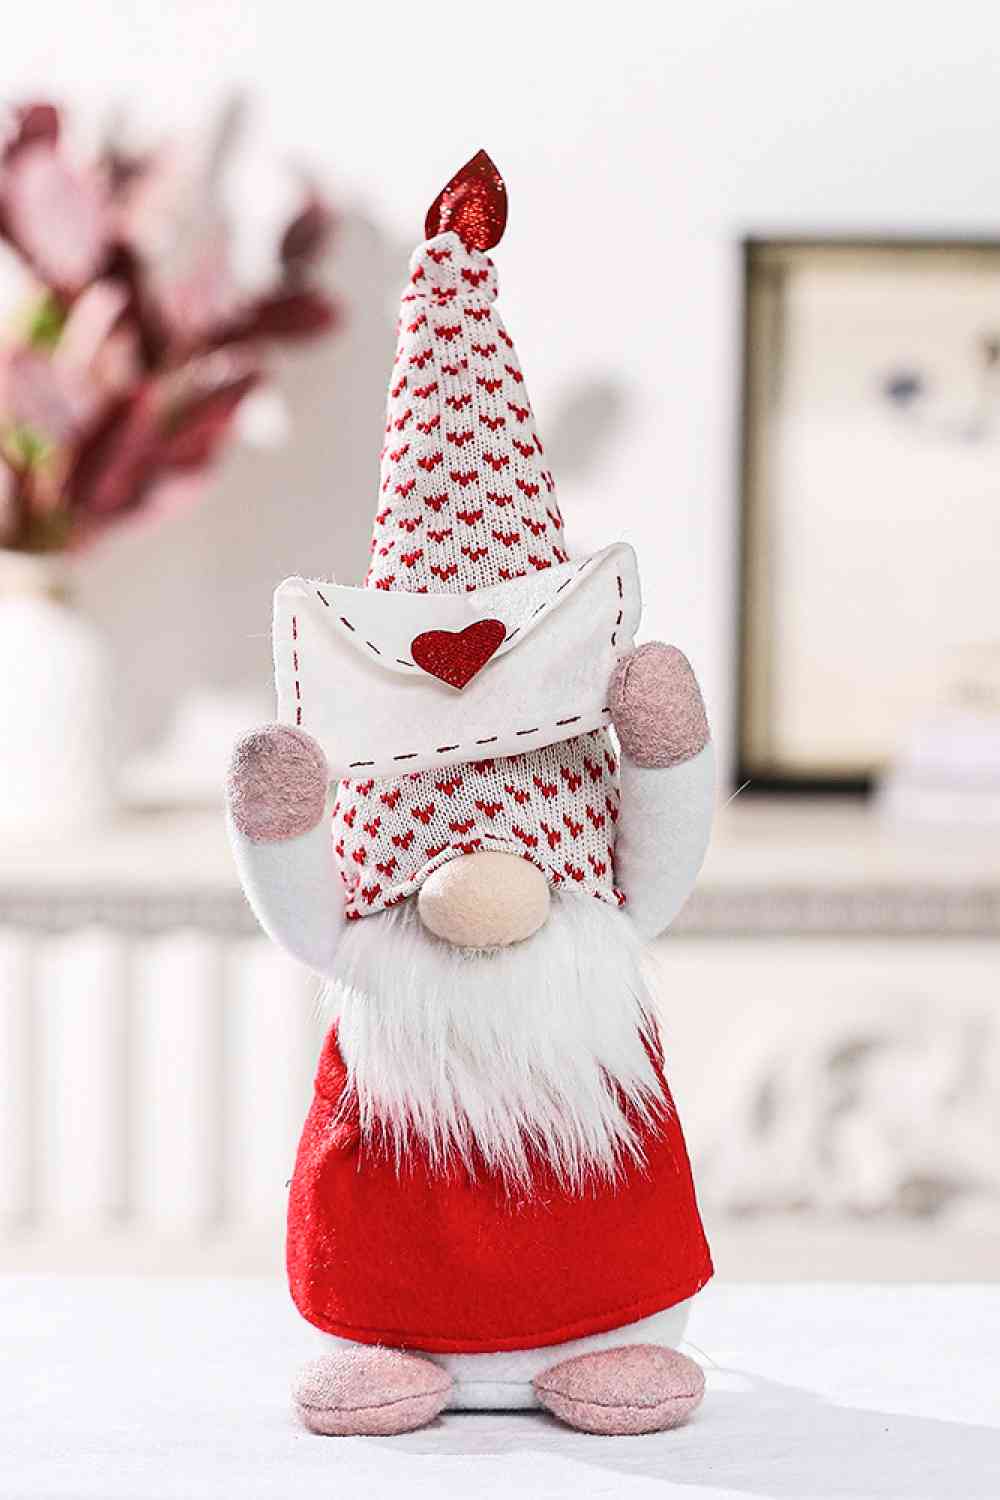 GNOMES - LOVE, HEART, SHARE WITH LOVED ONES AND/OR COLLECT THEM!!